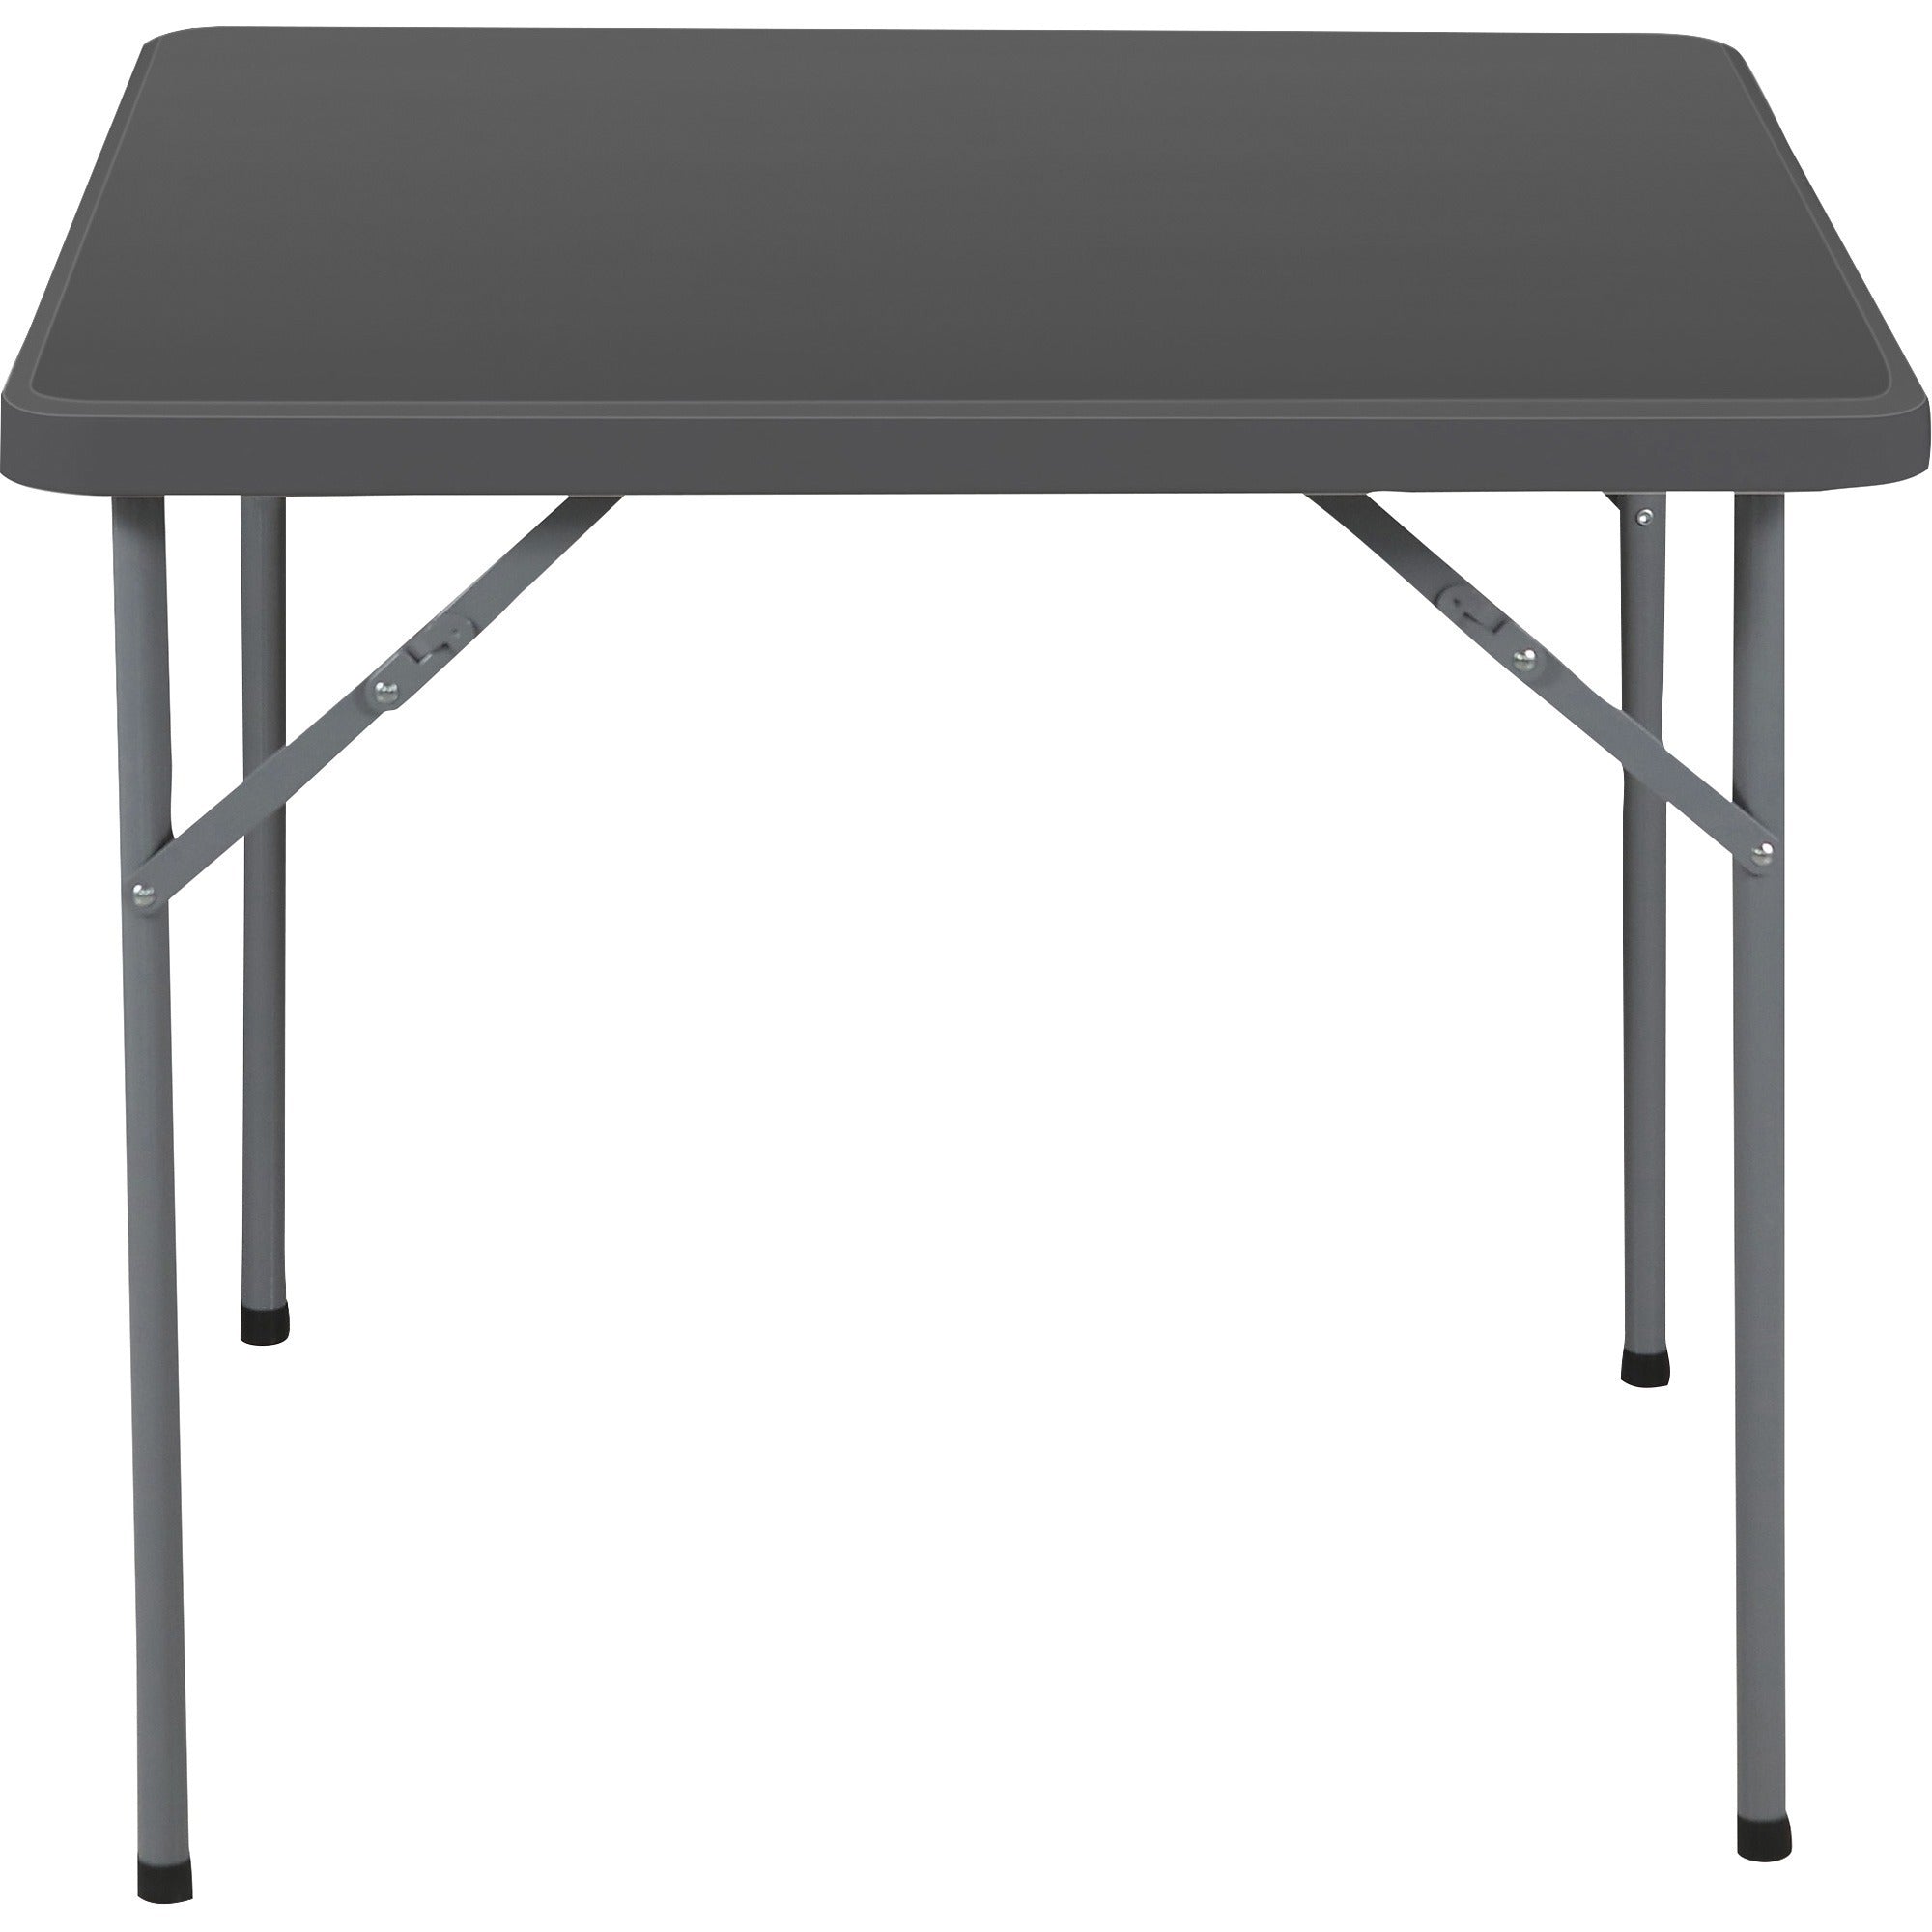 iceberg-indestructable-too-square-folding-table-for-table-topsquare-top-powder-coated-base-200-lb-capacity-34-table-top-length-x-34-table-top-width-29-height-gray-1-each_ice65257 - 2